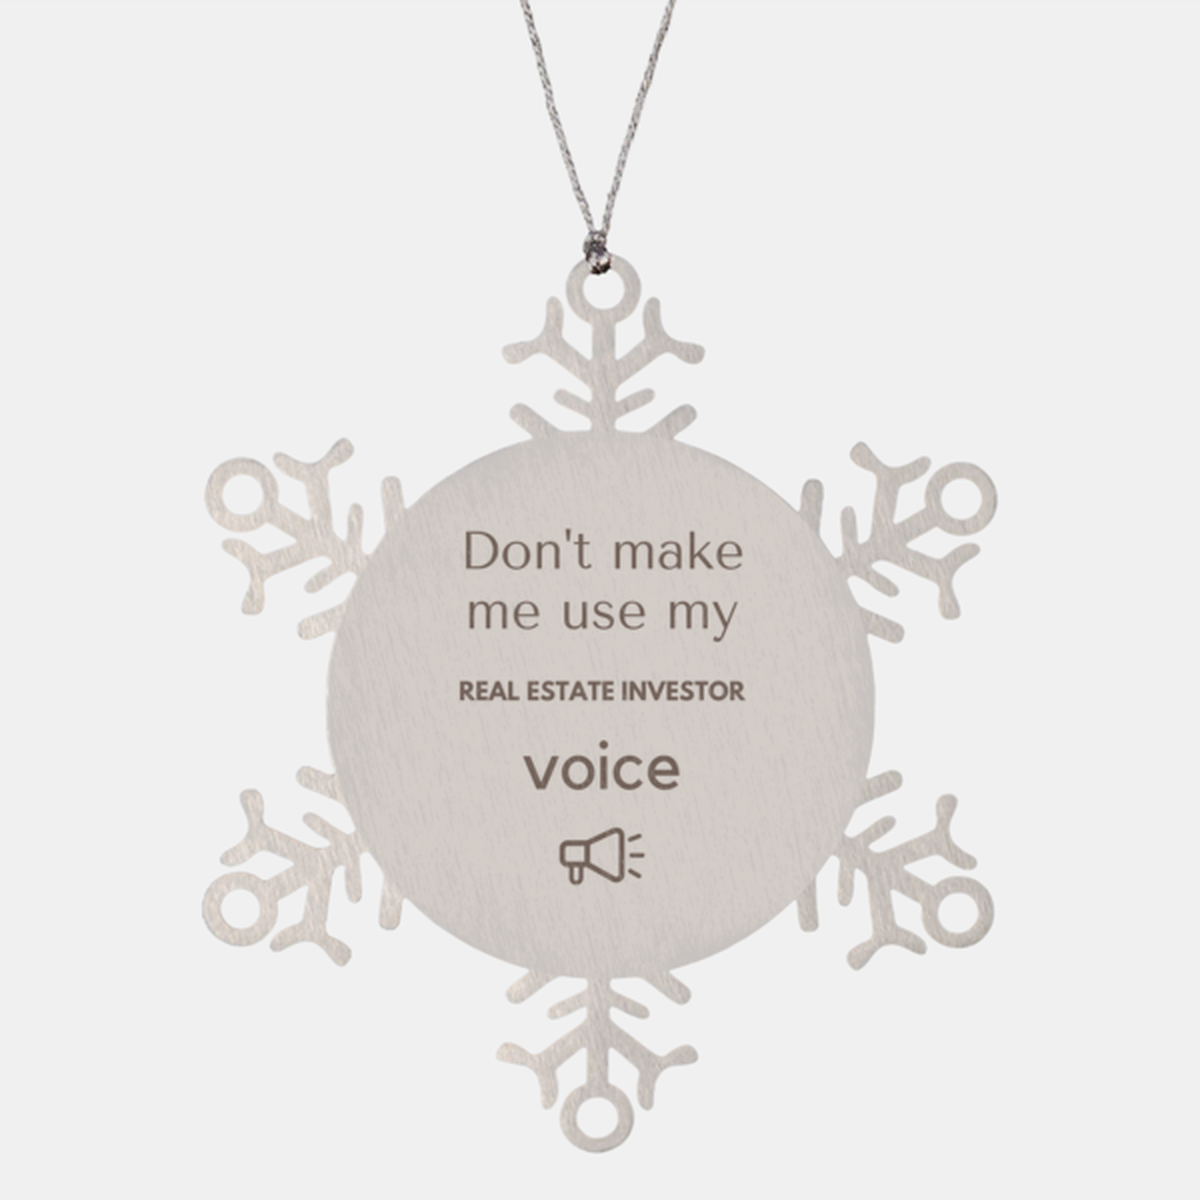 Don't make me use my Real Estate Investor voice, Sarcasm Real Estate Investor Ornament Gifts, Christmas Real Estate Investor Snowflake Ornament Unique Gifts For Real Estate Investor Coworkers, Men, Women, Colleague, Friends